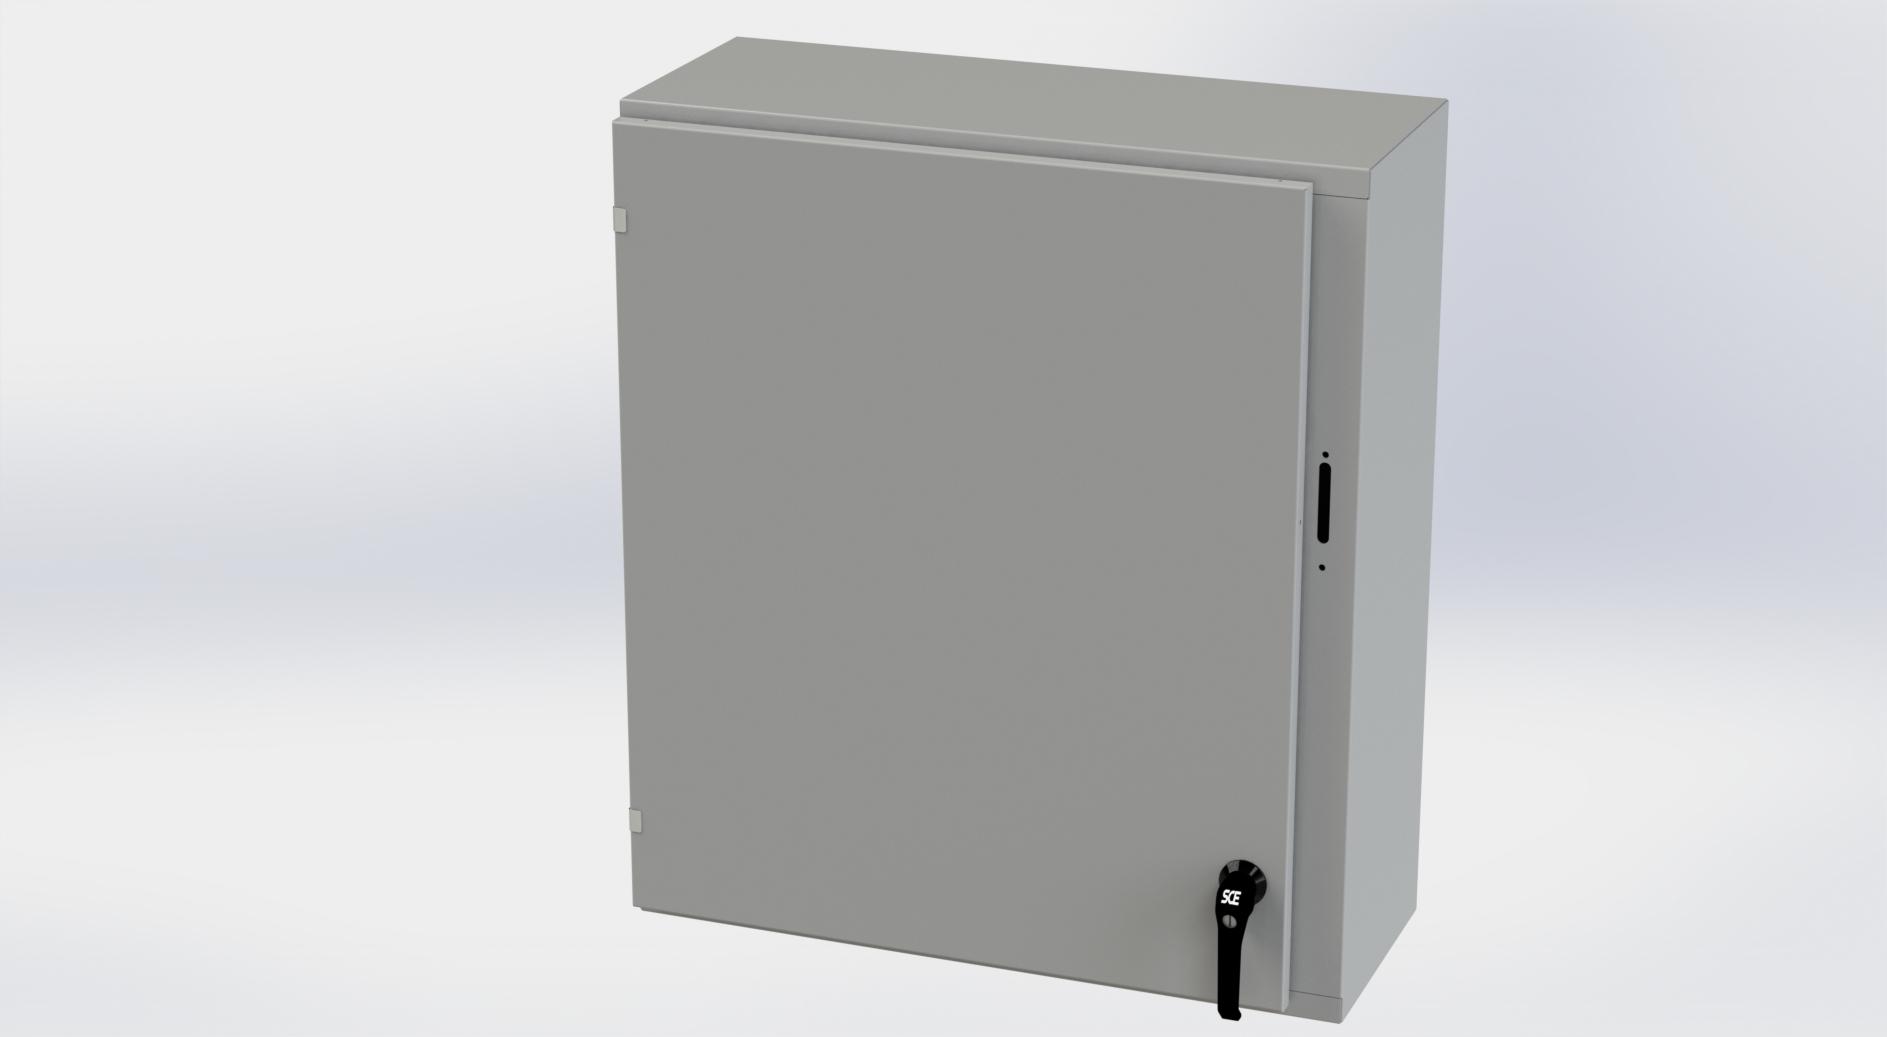 Saginaw Control SCE-36XEL3112LP XEL LP Enclosure, Height:36.00", Width:31.38", Depth:12.00", ANSI-61 gray powder coating inside and out. Optional sub-panels are powder coated white.